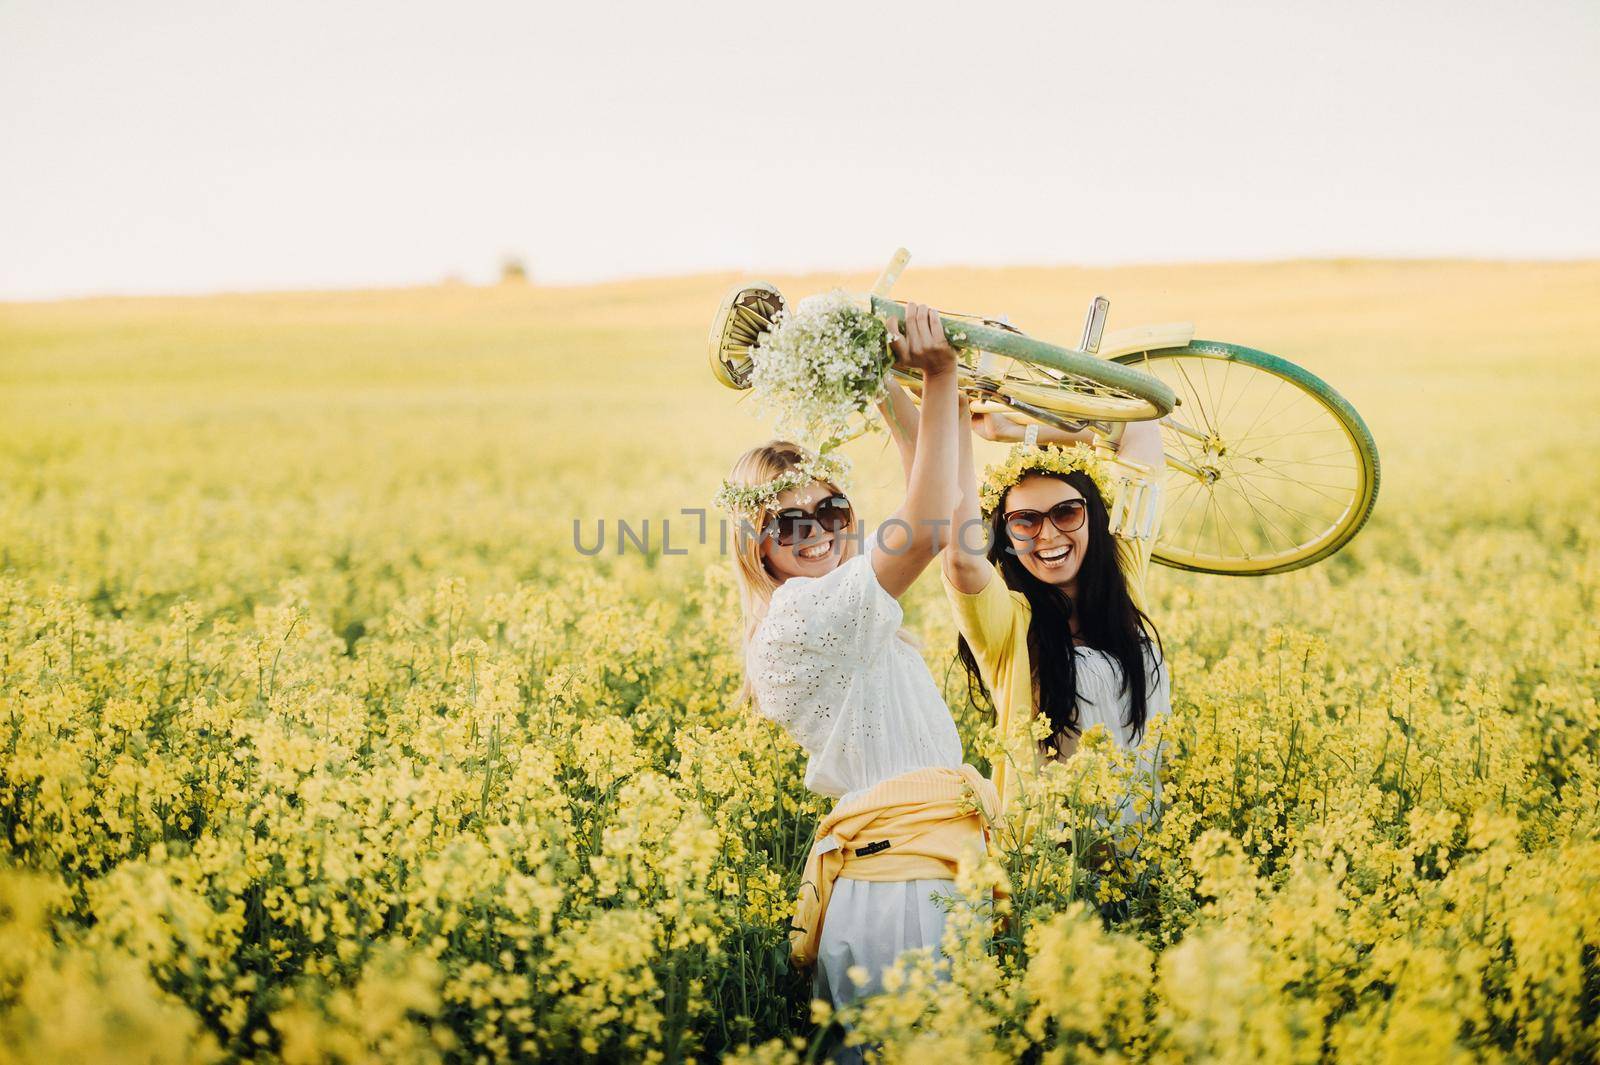 two women in a rapeseed field with a bicycle enjoy a walk in nature rejoicing.